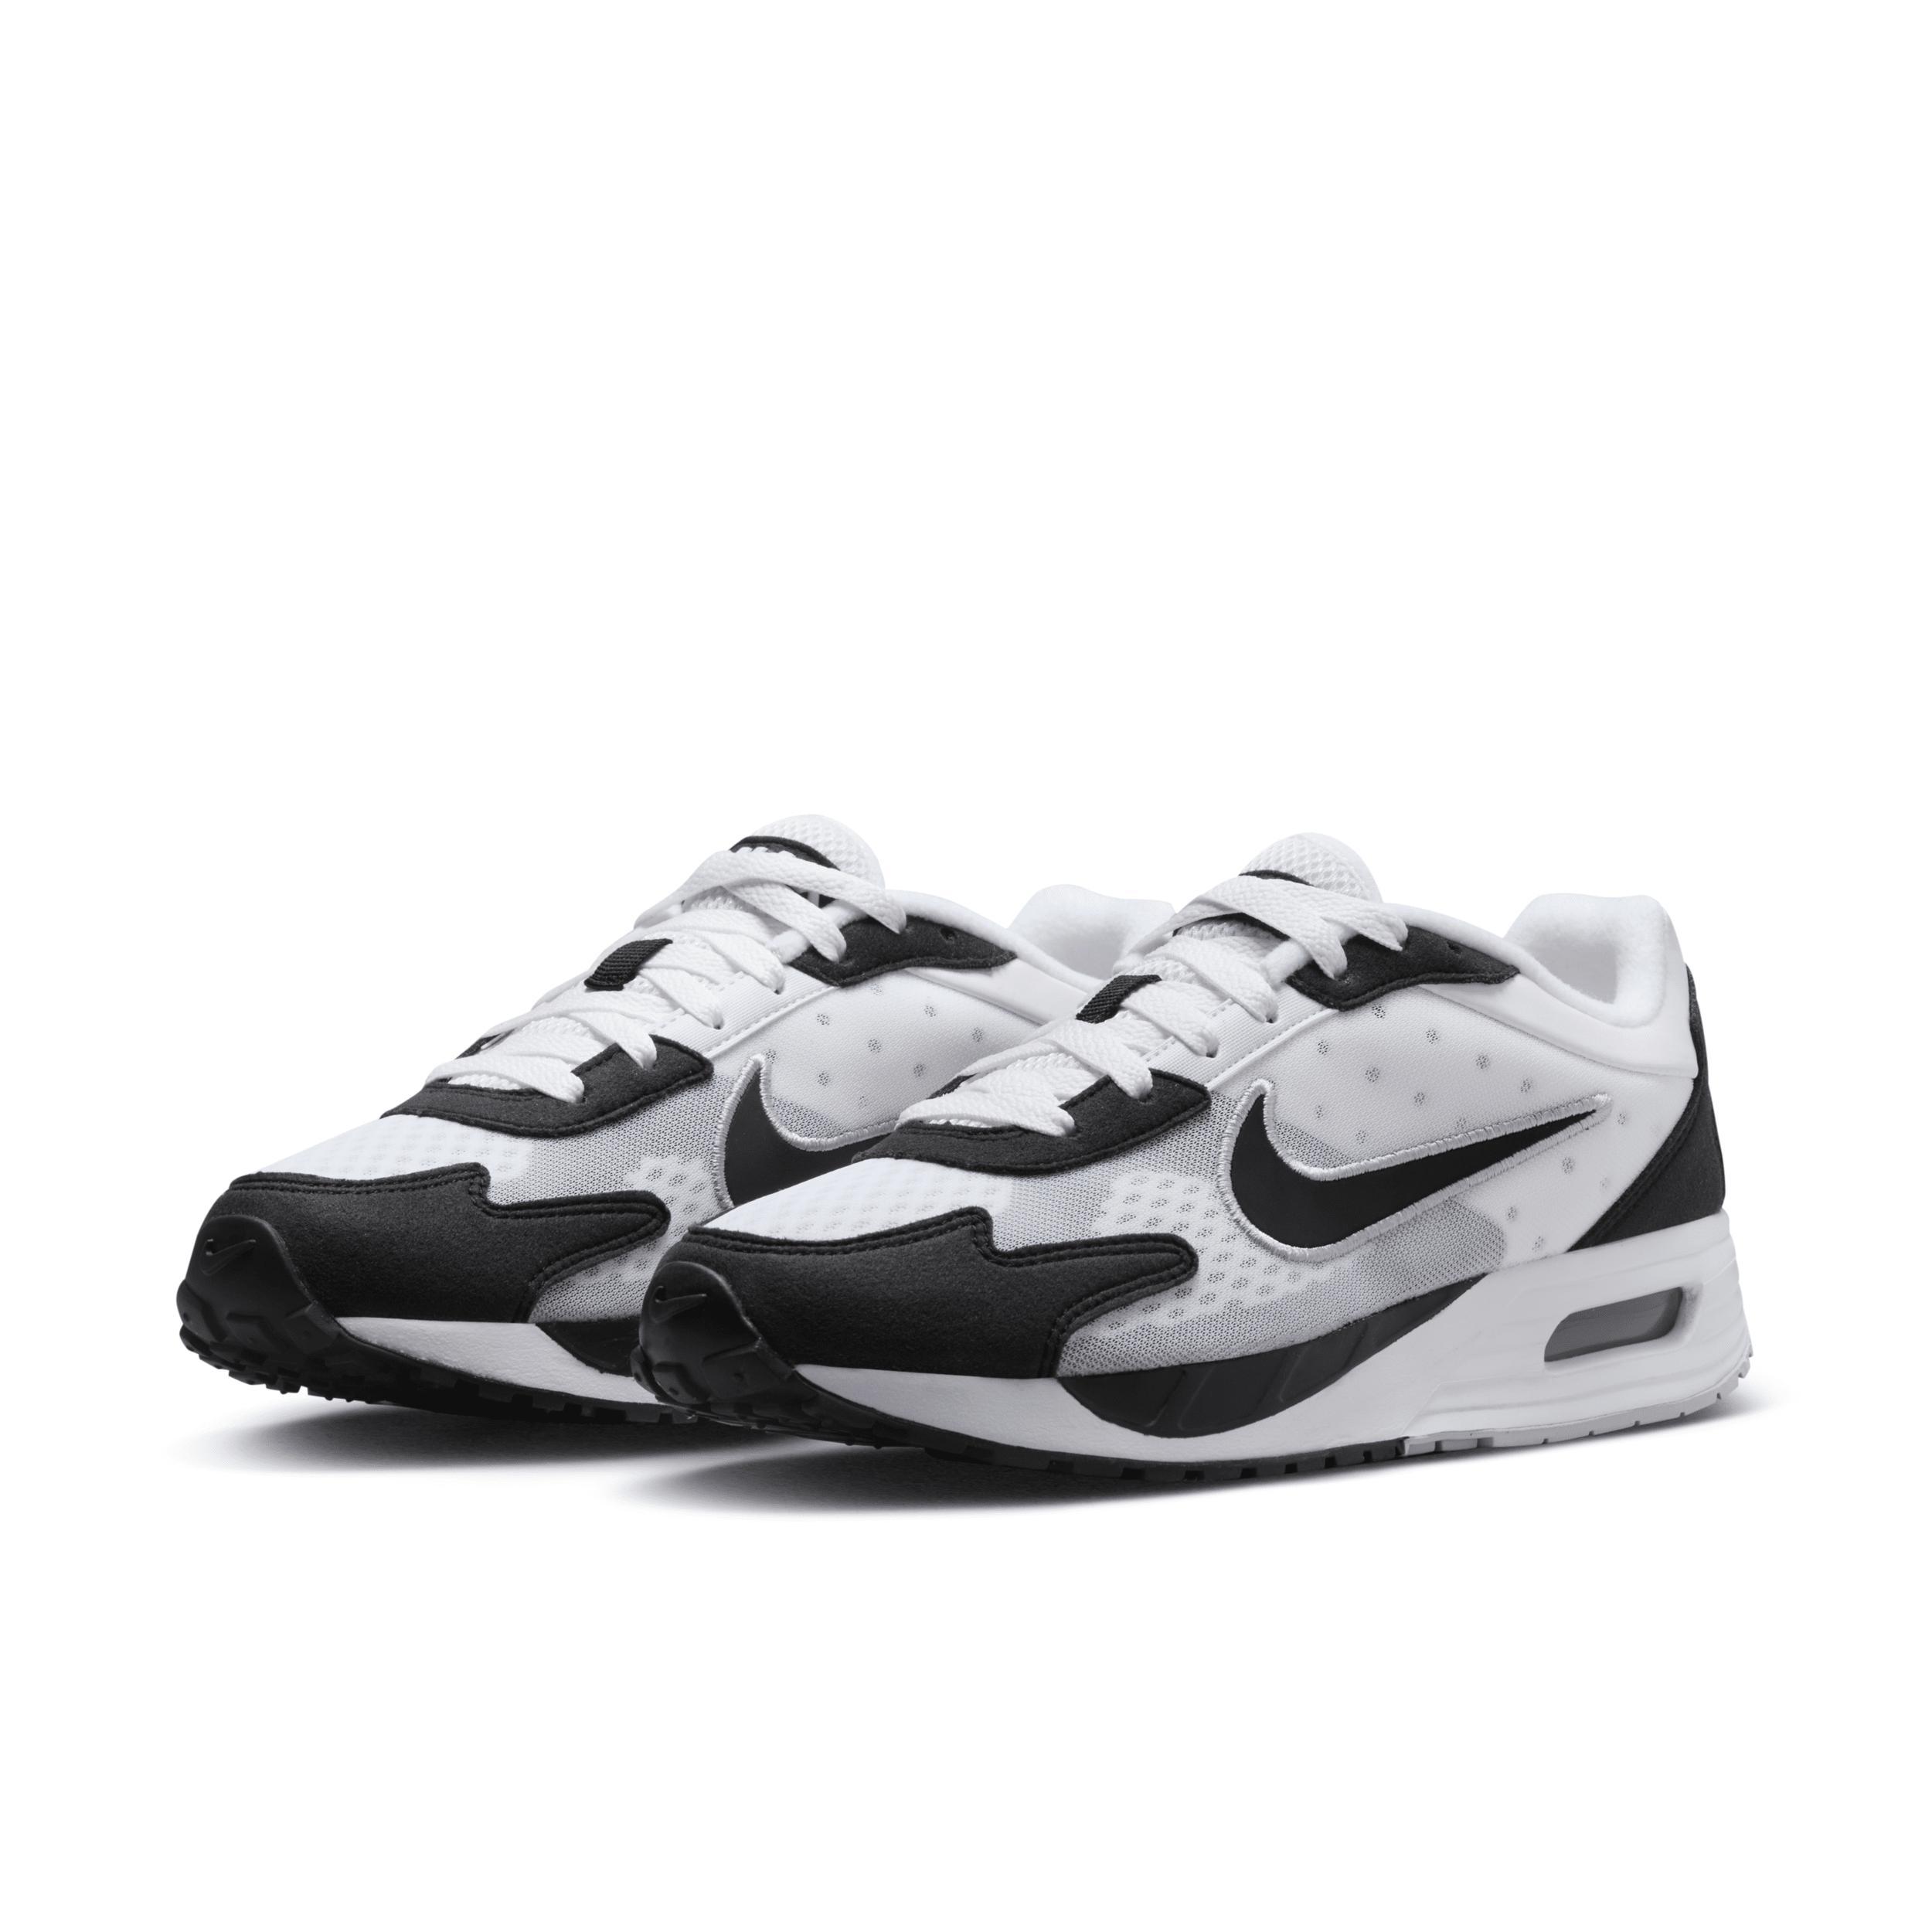 Nike Women's Air Max Solo Shoes Product Image